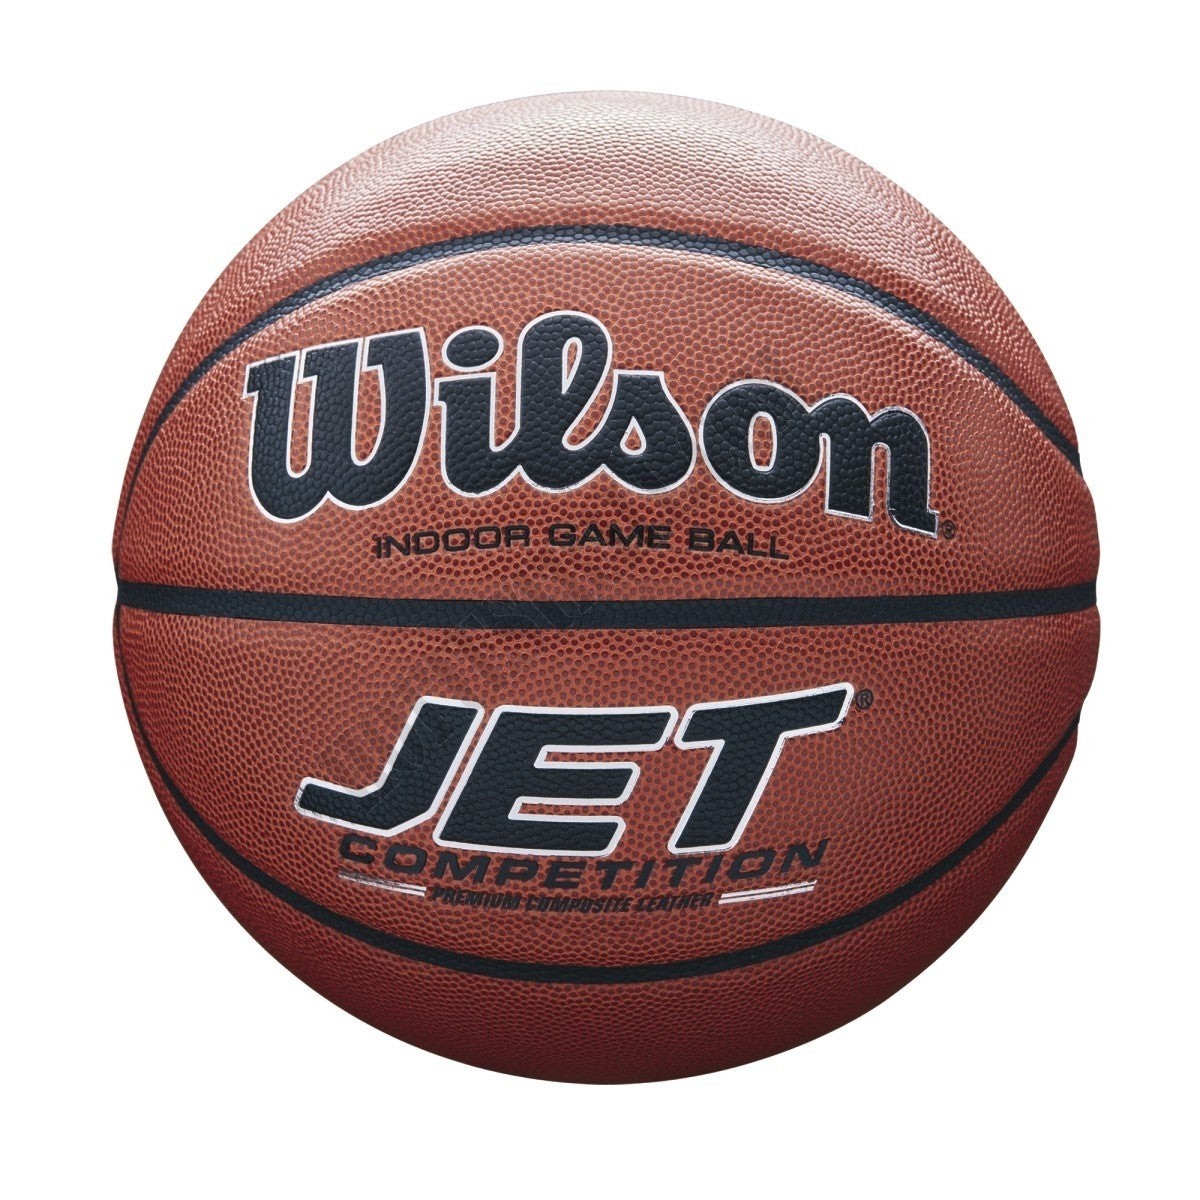 Jet Competition Basketball - Wilson Discount Store - Jet Competition Basketball - Wilson Discount Store